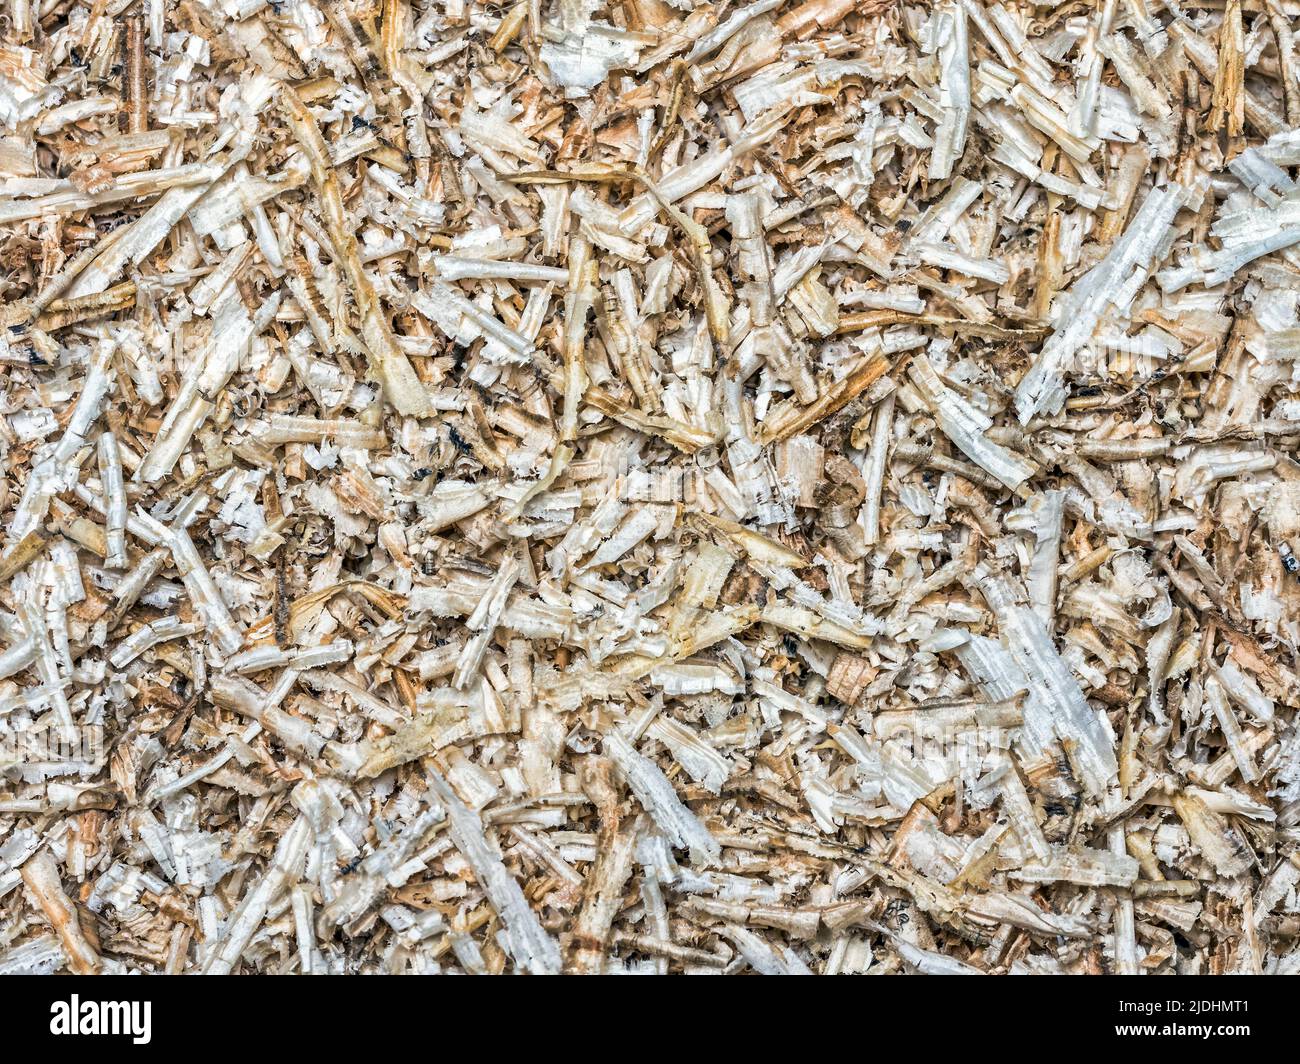 Background of wooden planing chips shot from above Stock Photo